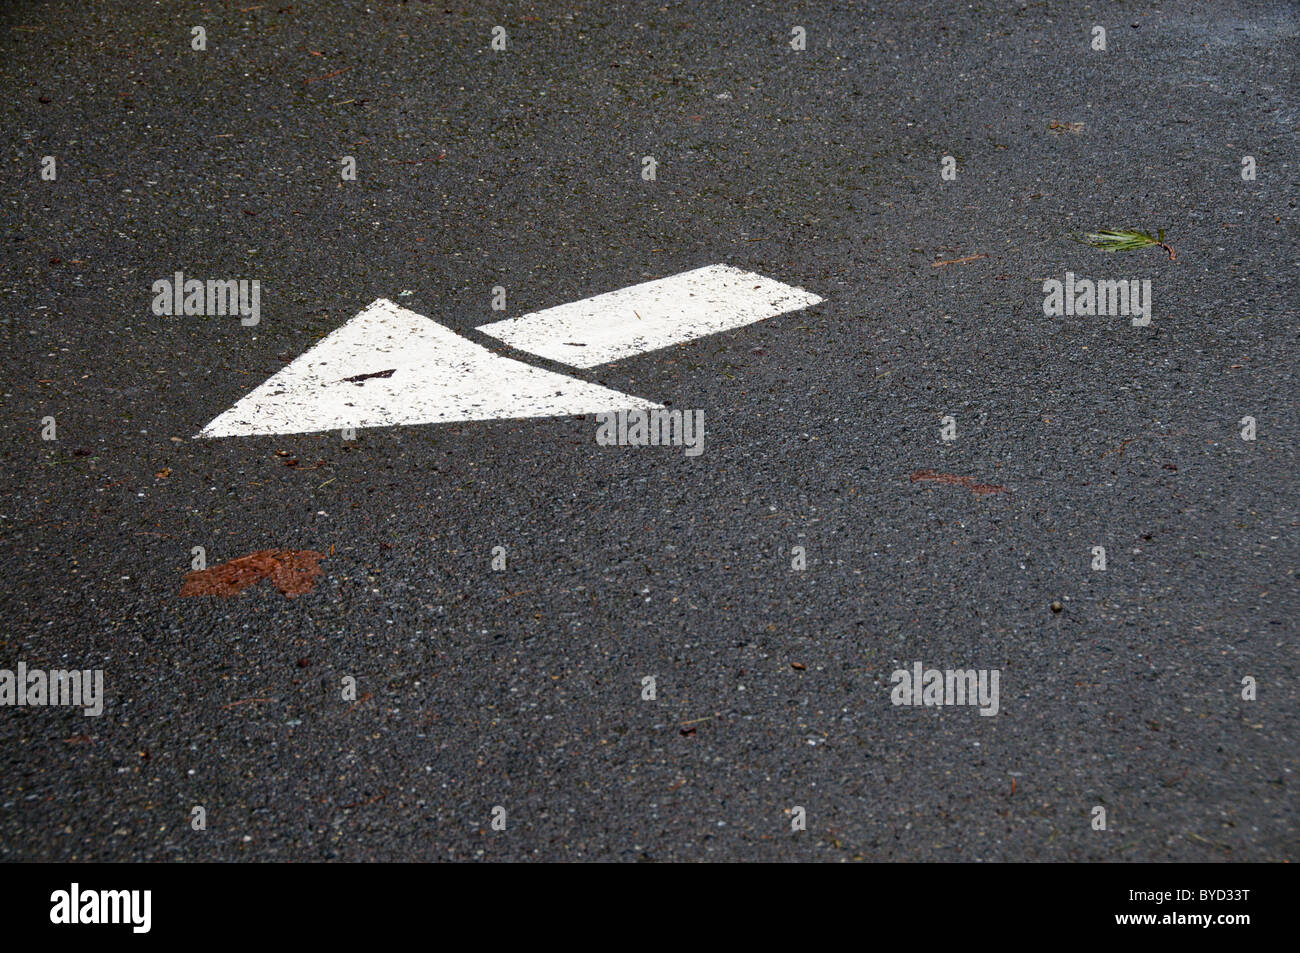 A white arrow painted on asphalt points in one direction. Stock Photo